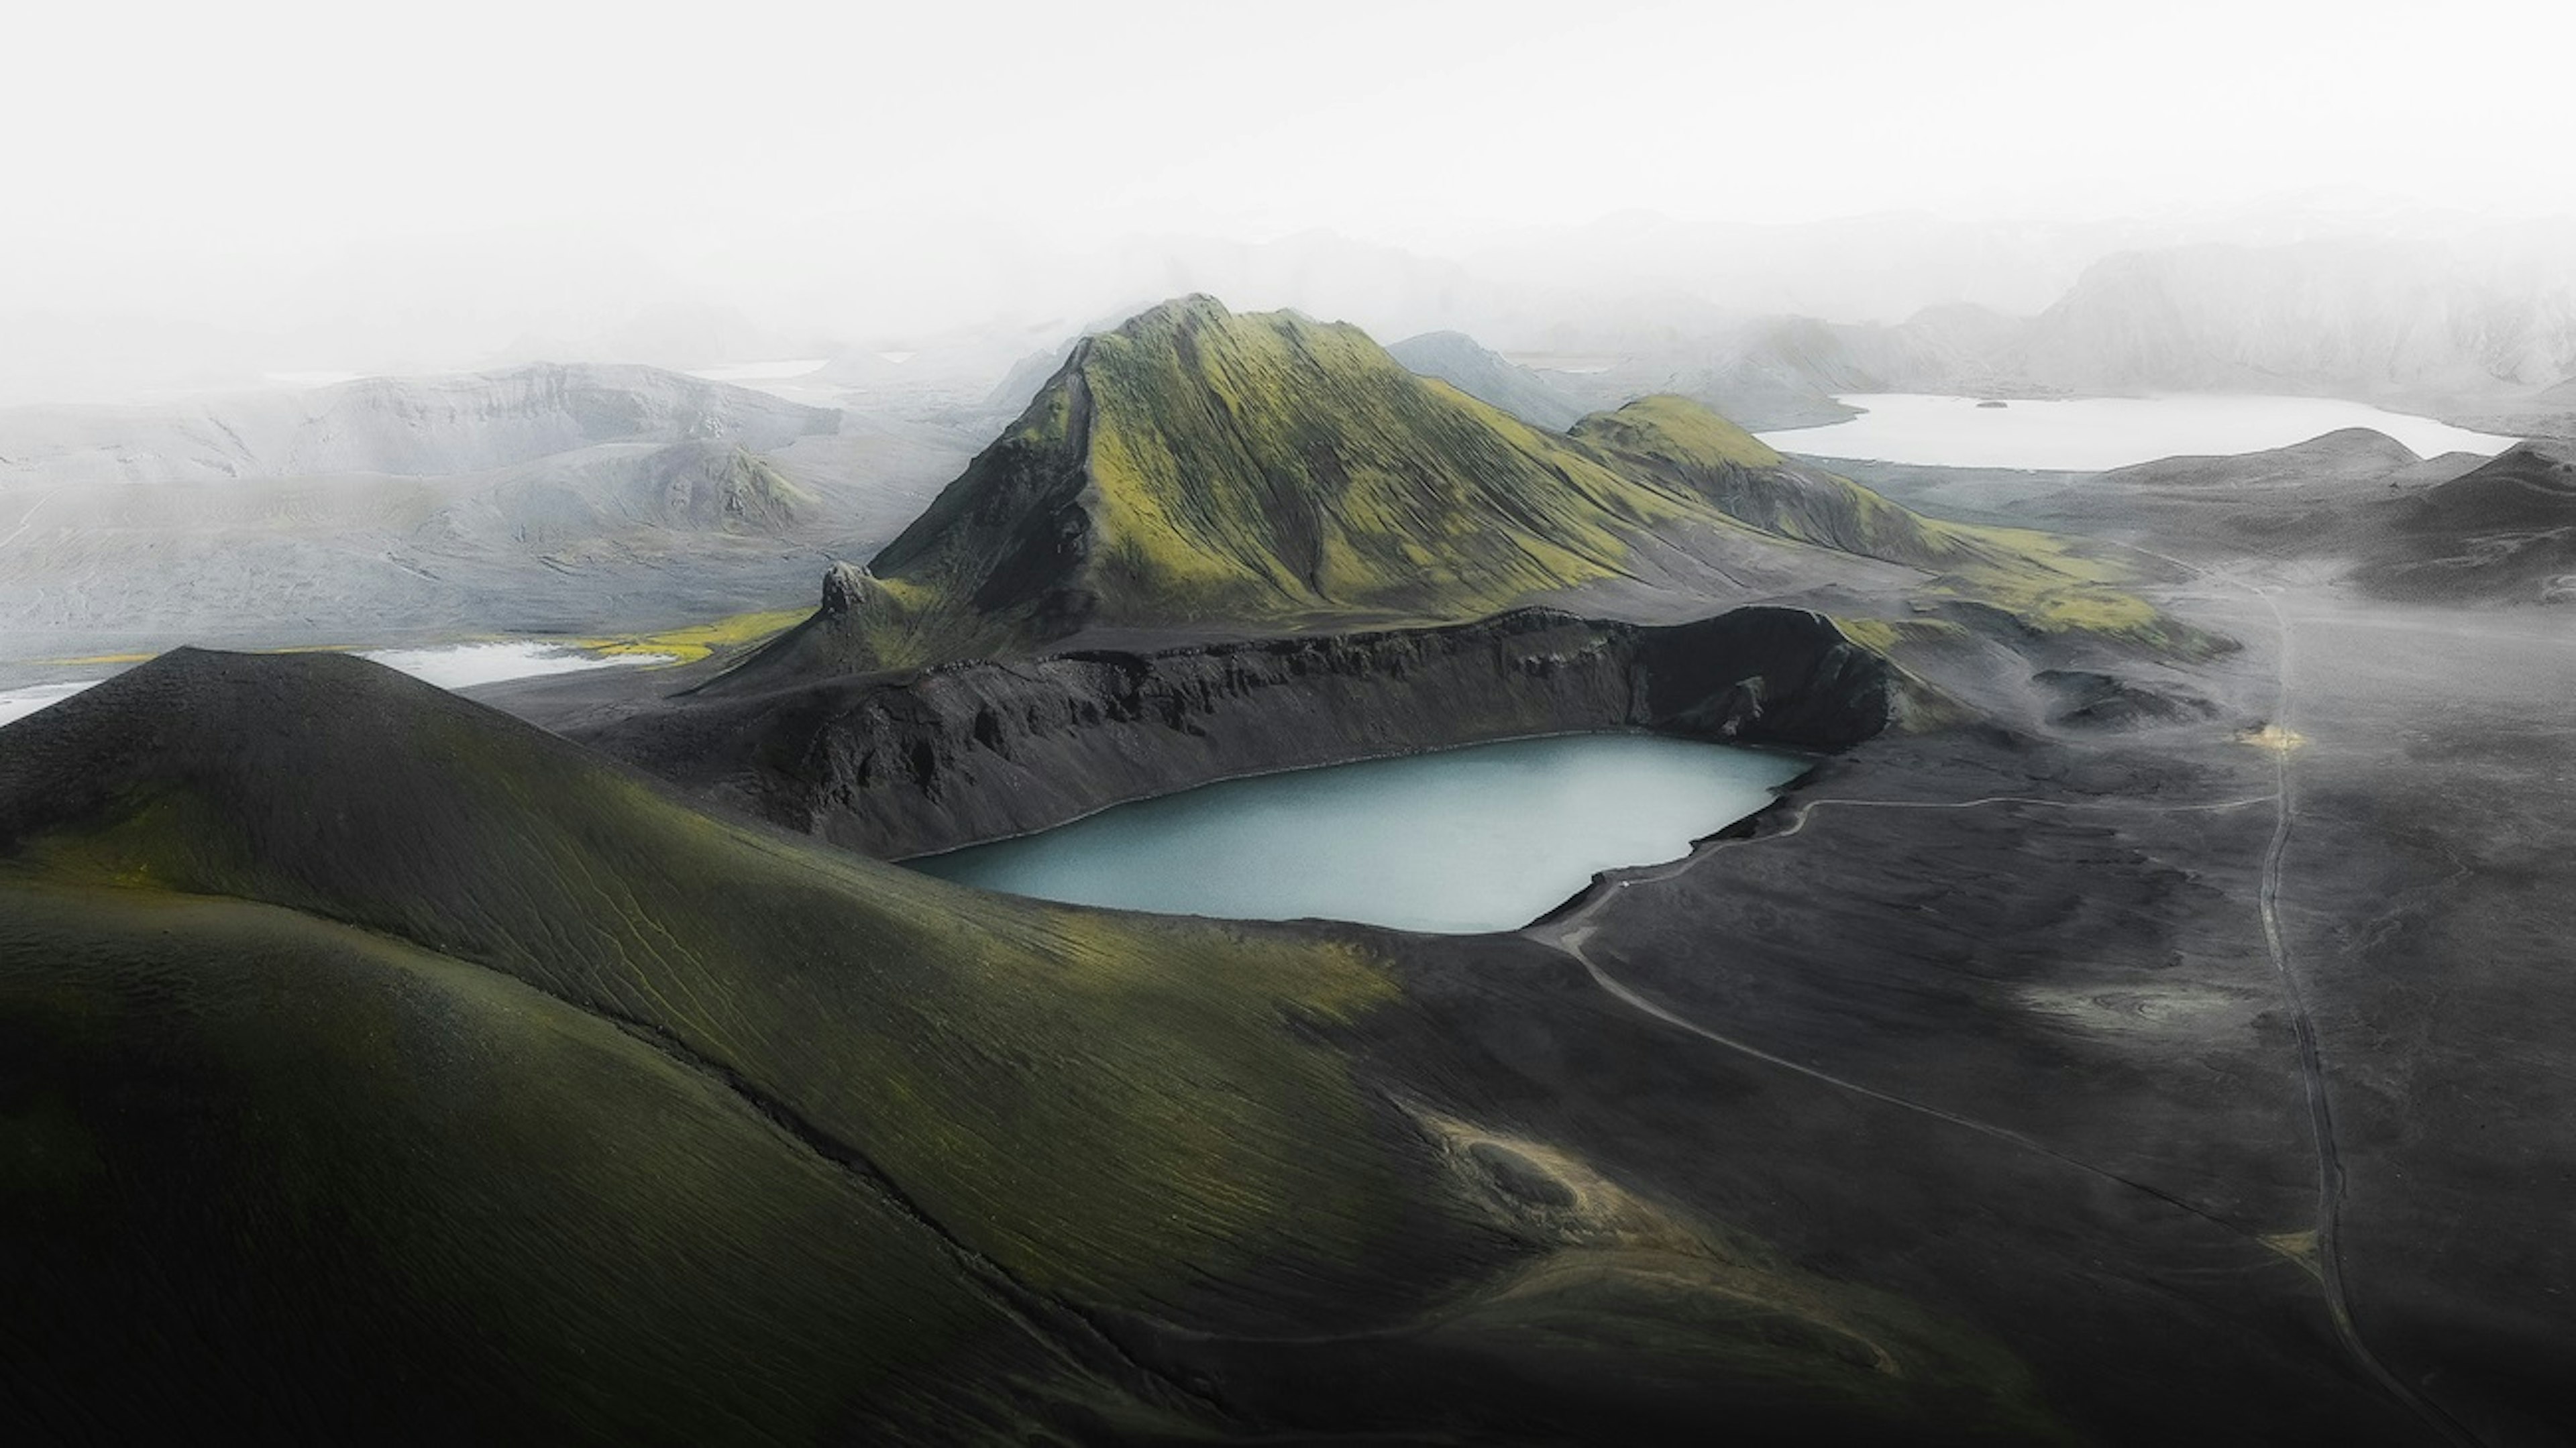 A crater lake in Iceland